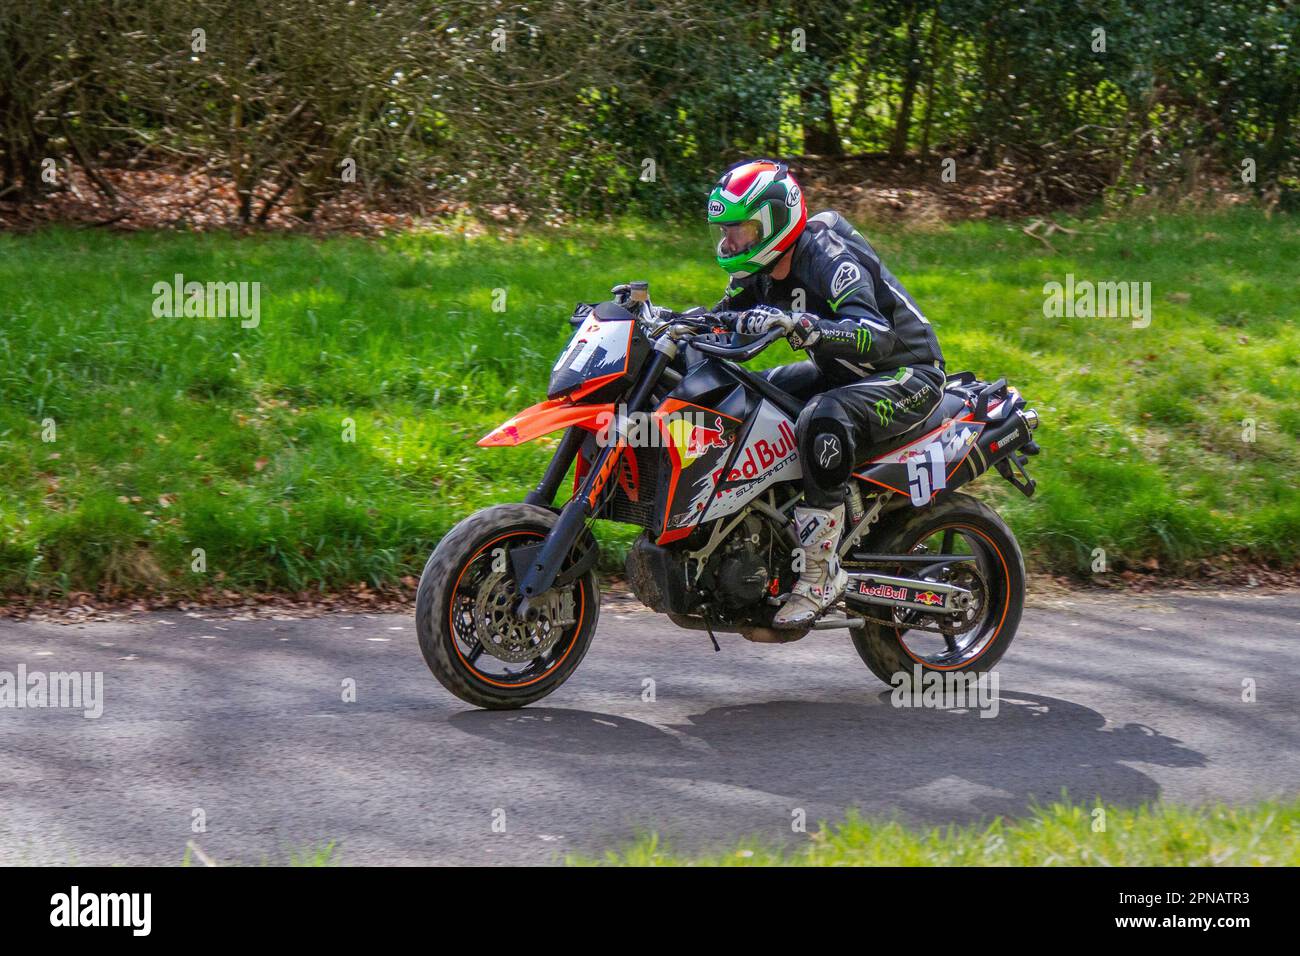 Rider 51 Sean Kevin Duxbury riding a 2005 KTM 950SM 950cc modern Supermoto competing at the 2023 HOGHTON TOWER  Lancashire Motorcycle Sprint Course 1/8th timed mile drive event. UK Stock Photo